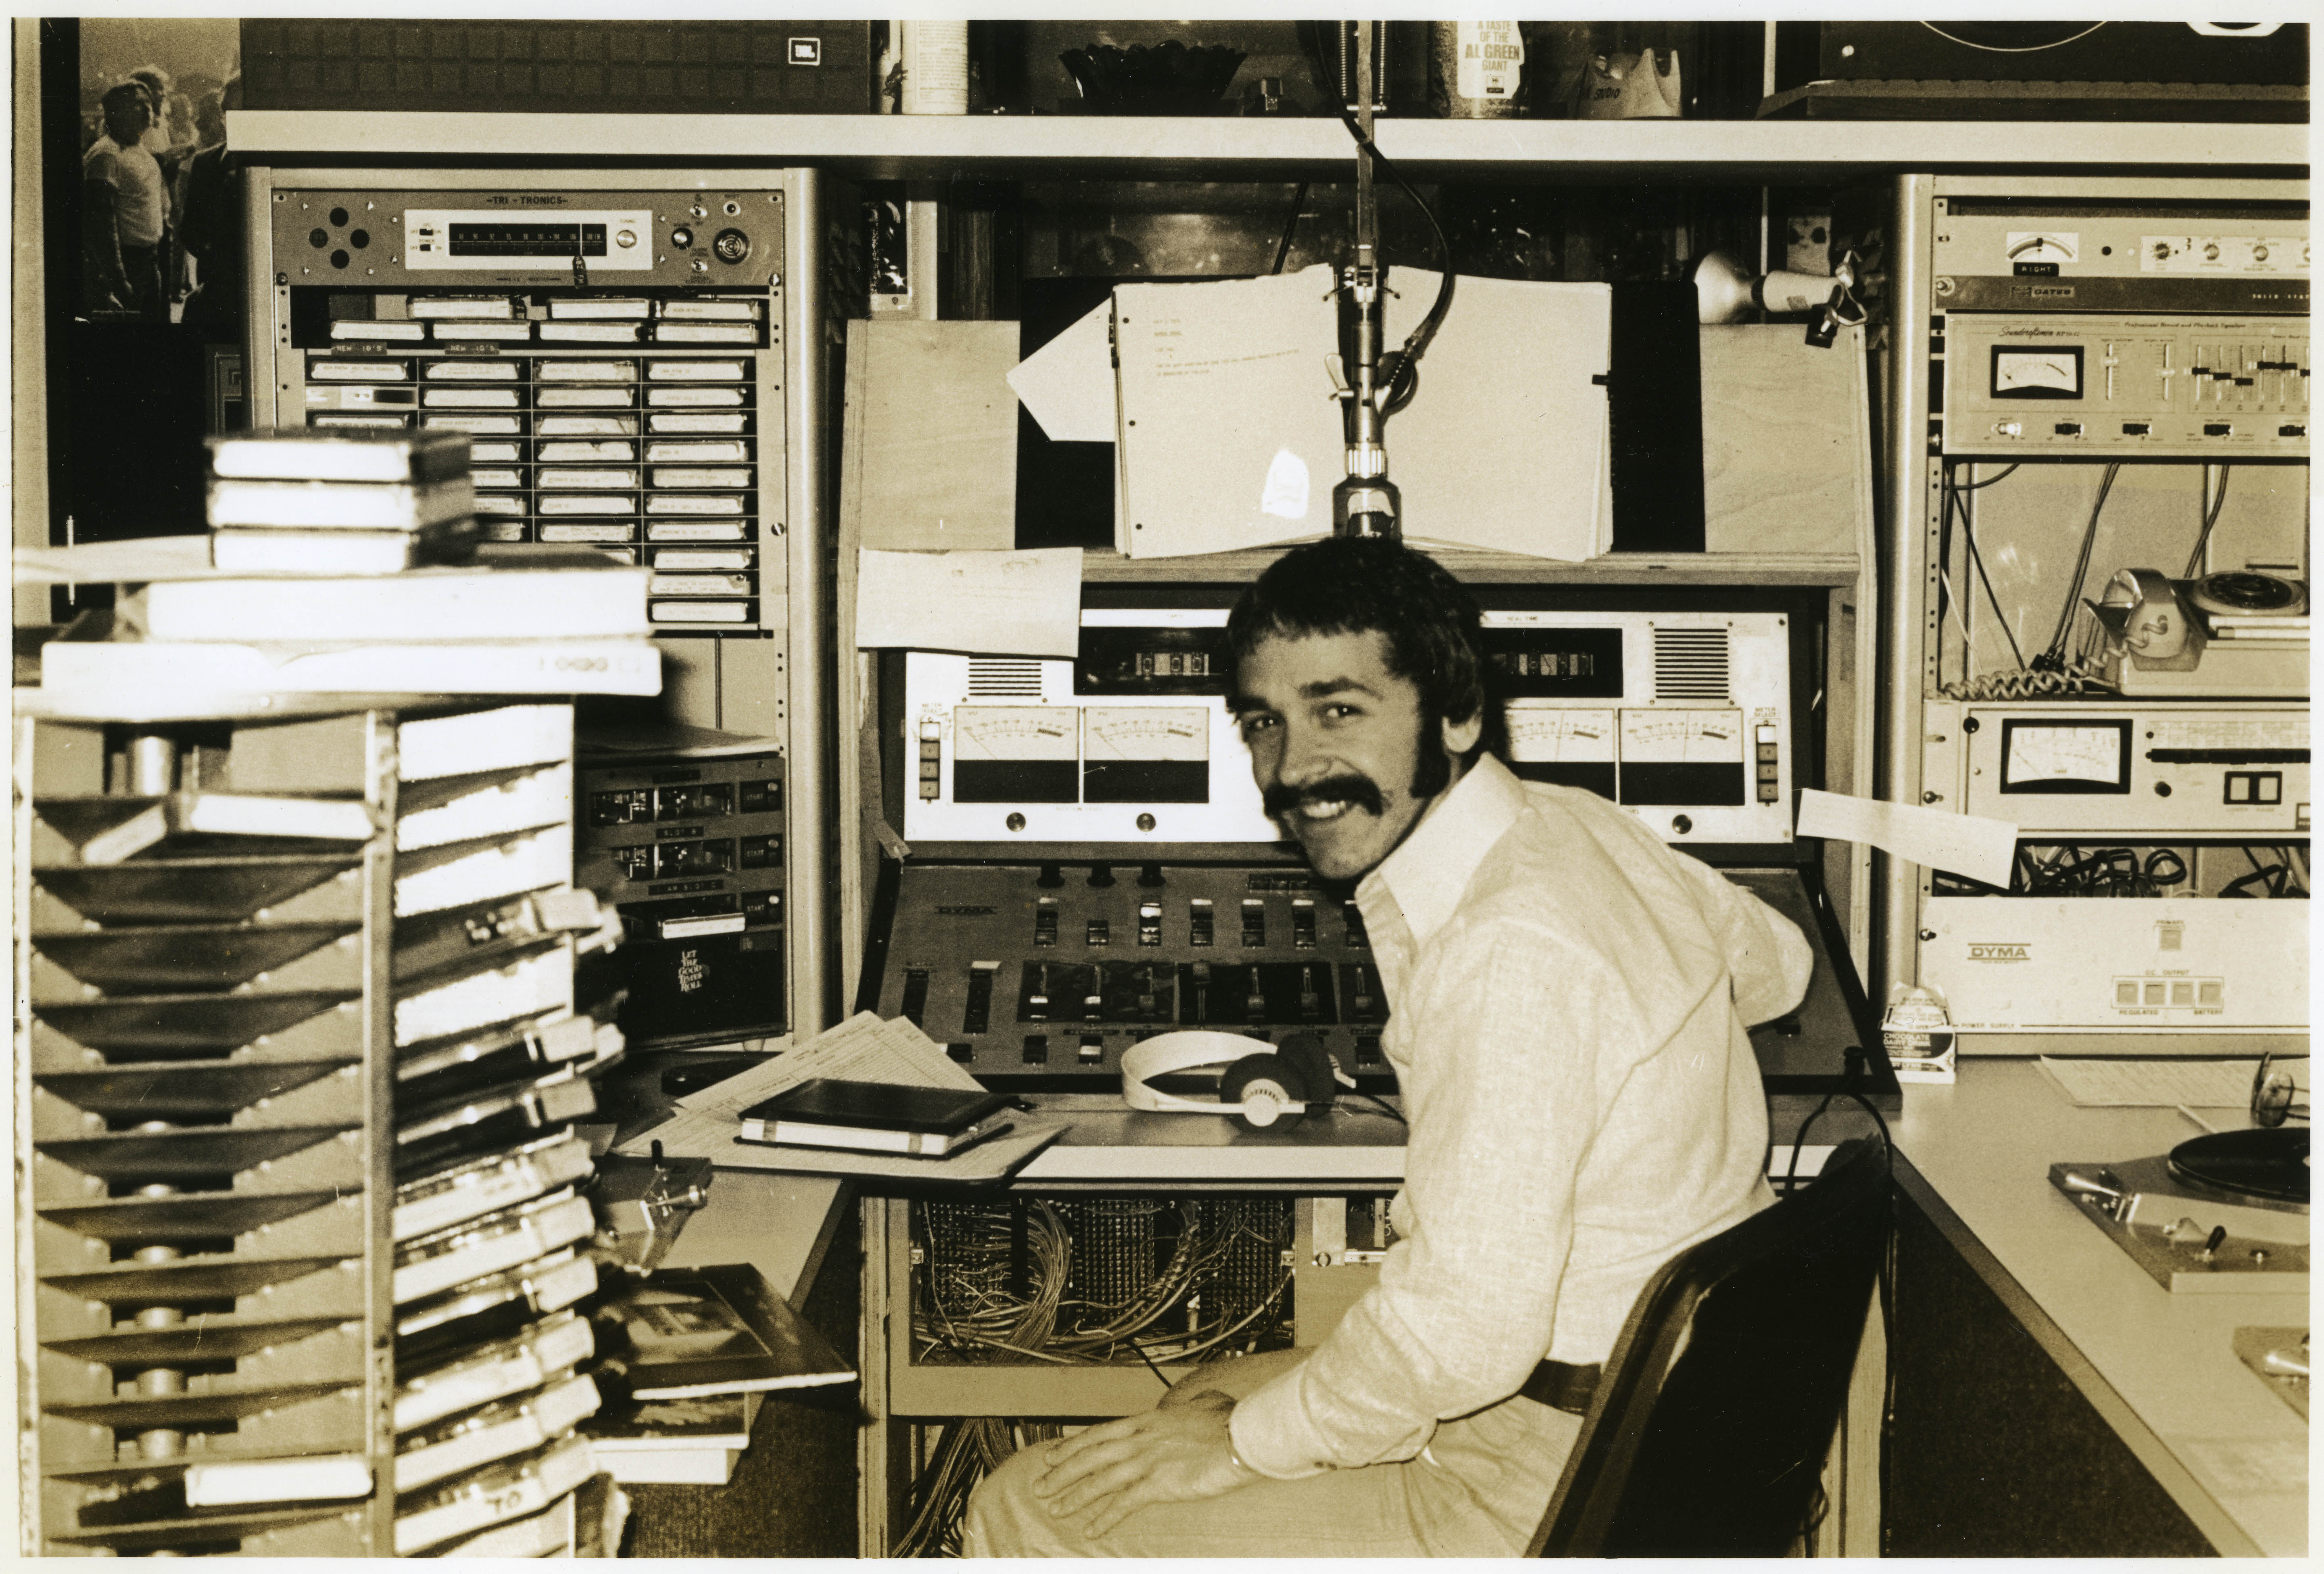 Depiction of Tommy Hadges at the WBCN studios in the Prudential Center, ca. 1976